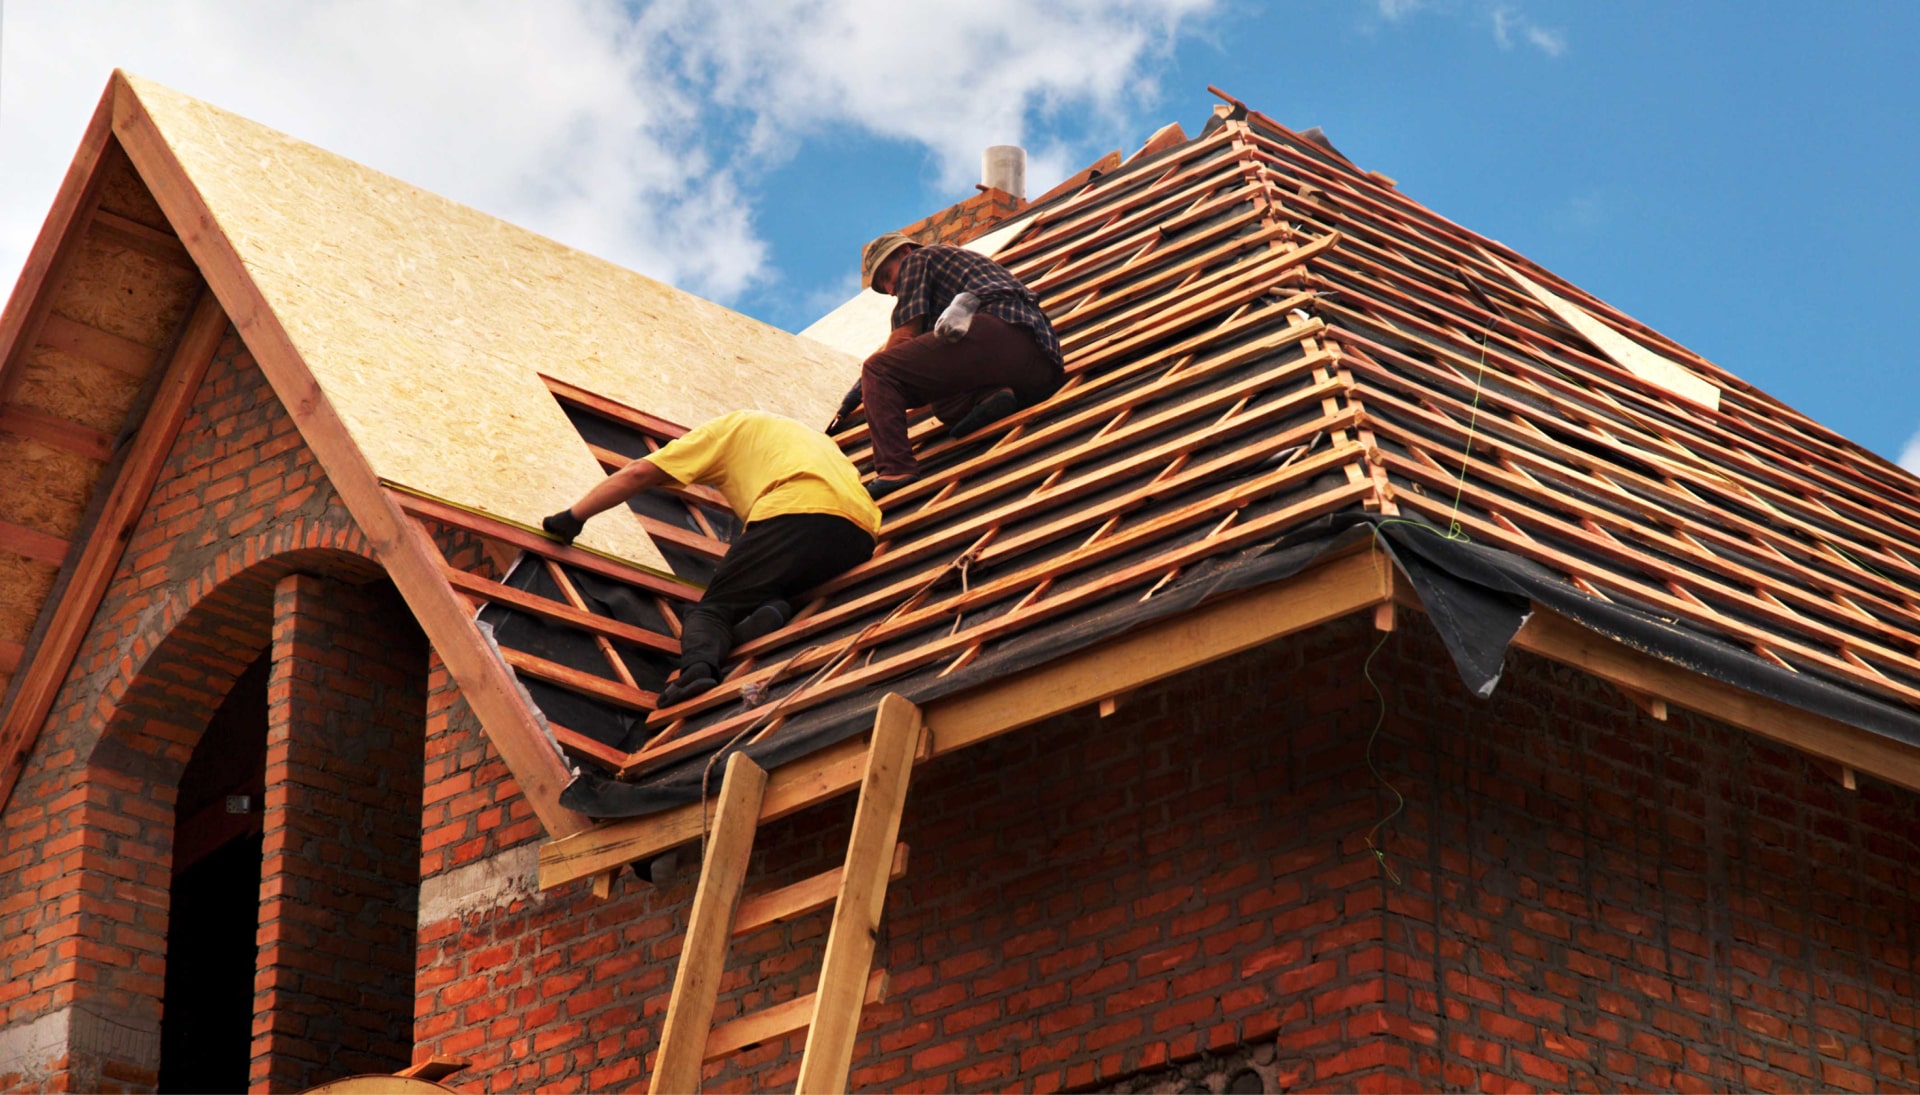 Trustworthy professional roofing services in Lakeland, Florida with years of industry expertise.